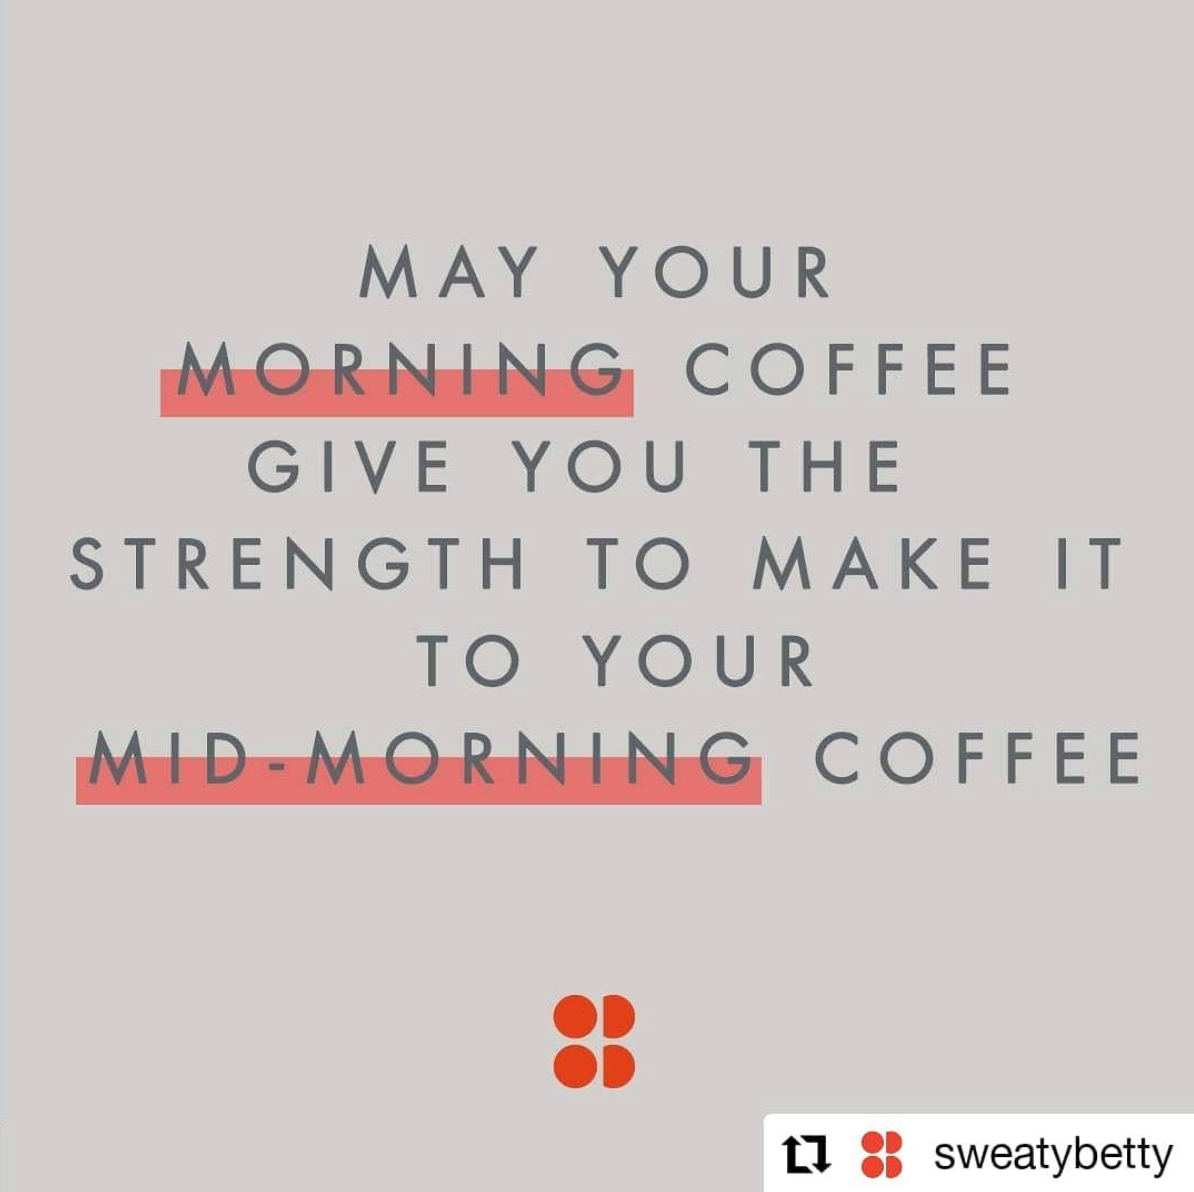 coffee memes - international morongo casino - May Your Morning Coffee Give You The Strength To Make It To Your Mid Morning Coffee ti sweatybetty